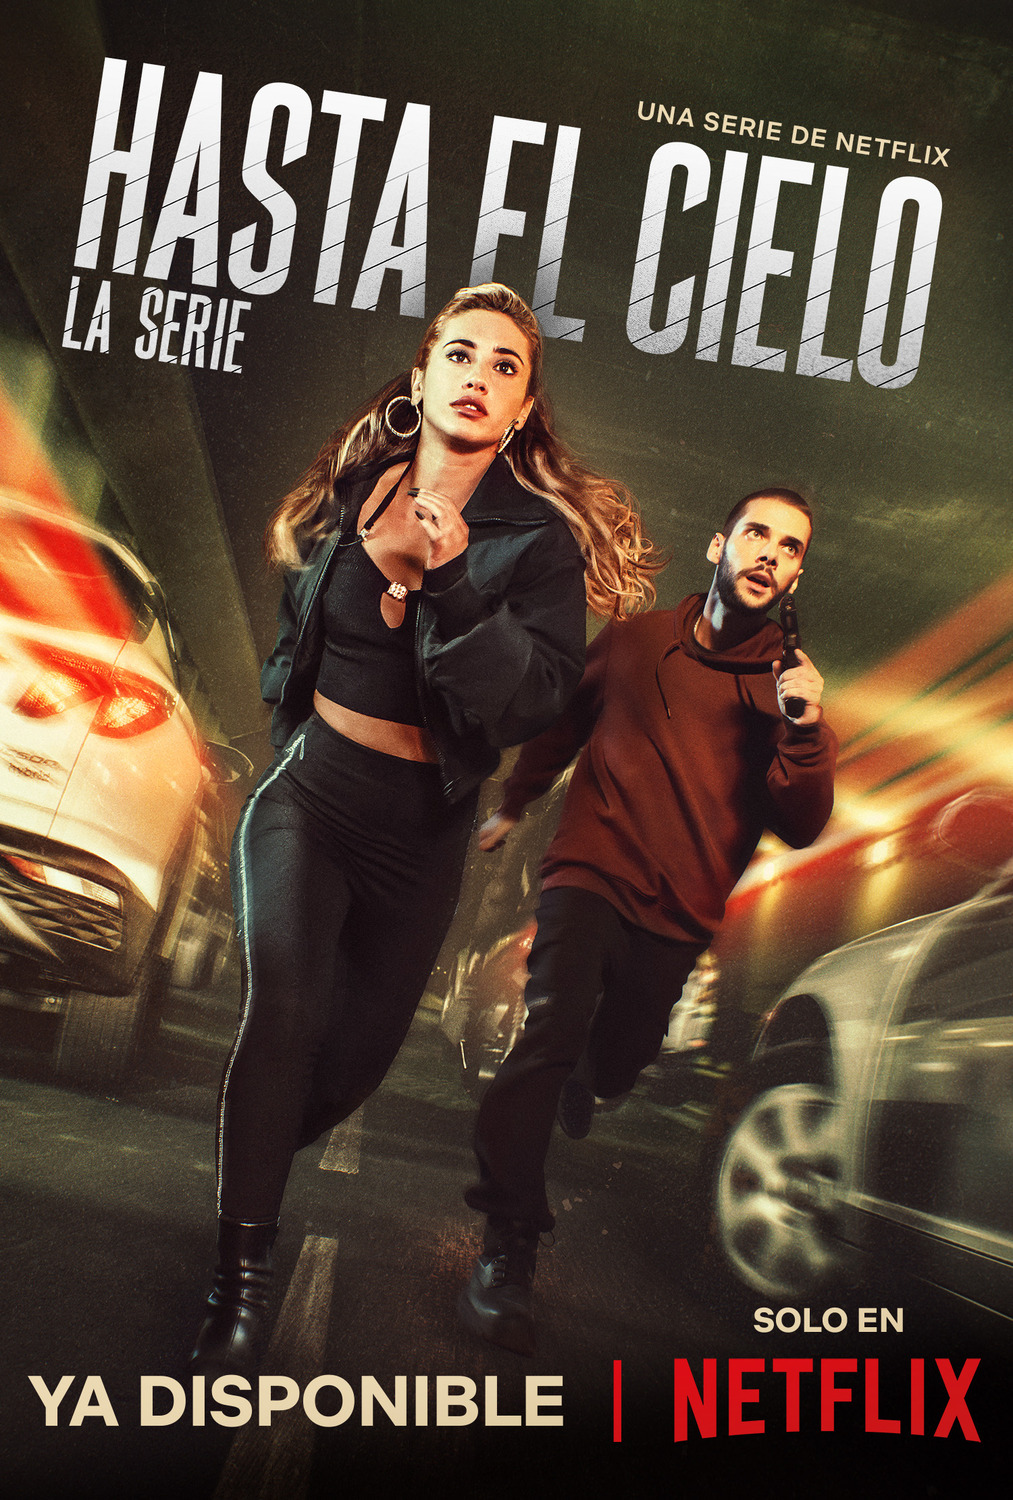 Extra Large TV Poster Image for Hasta el cielo: La serie (#6 of 7)